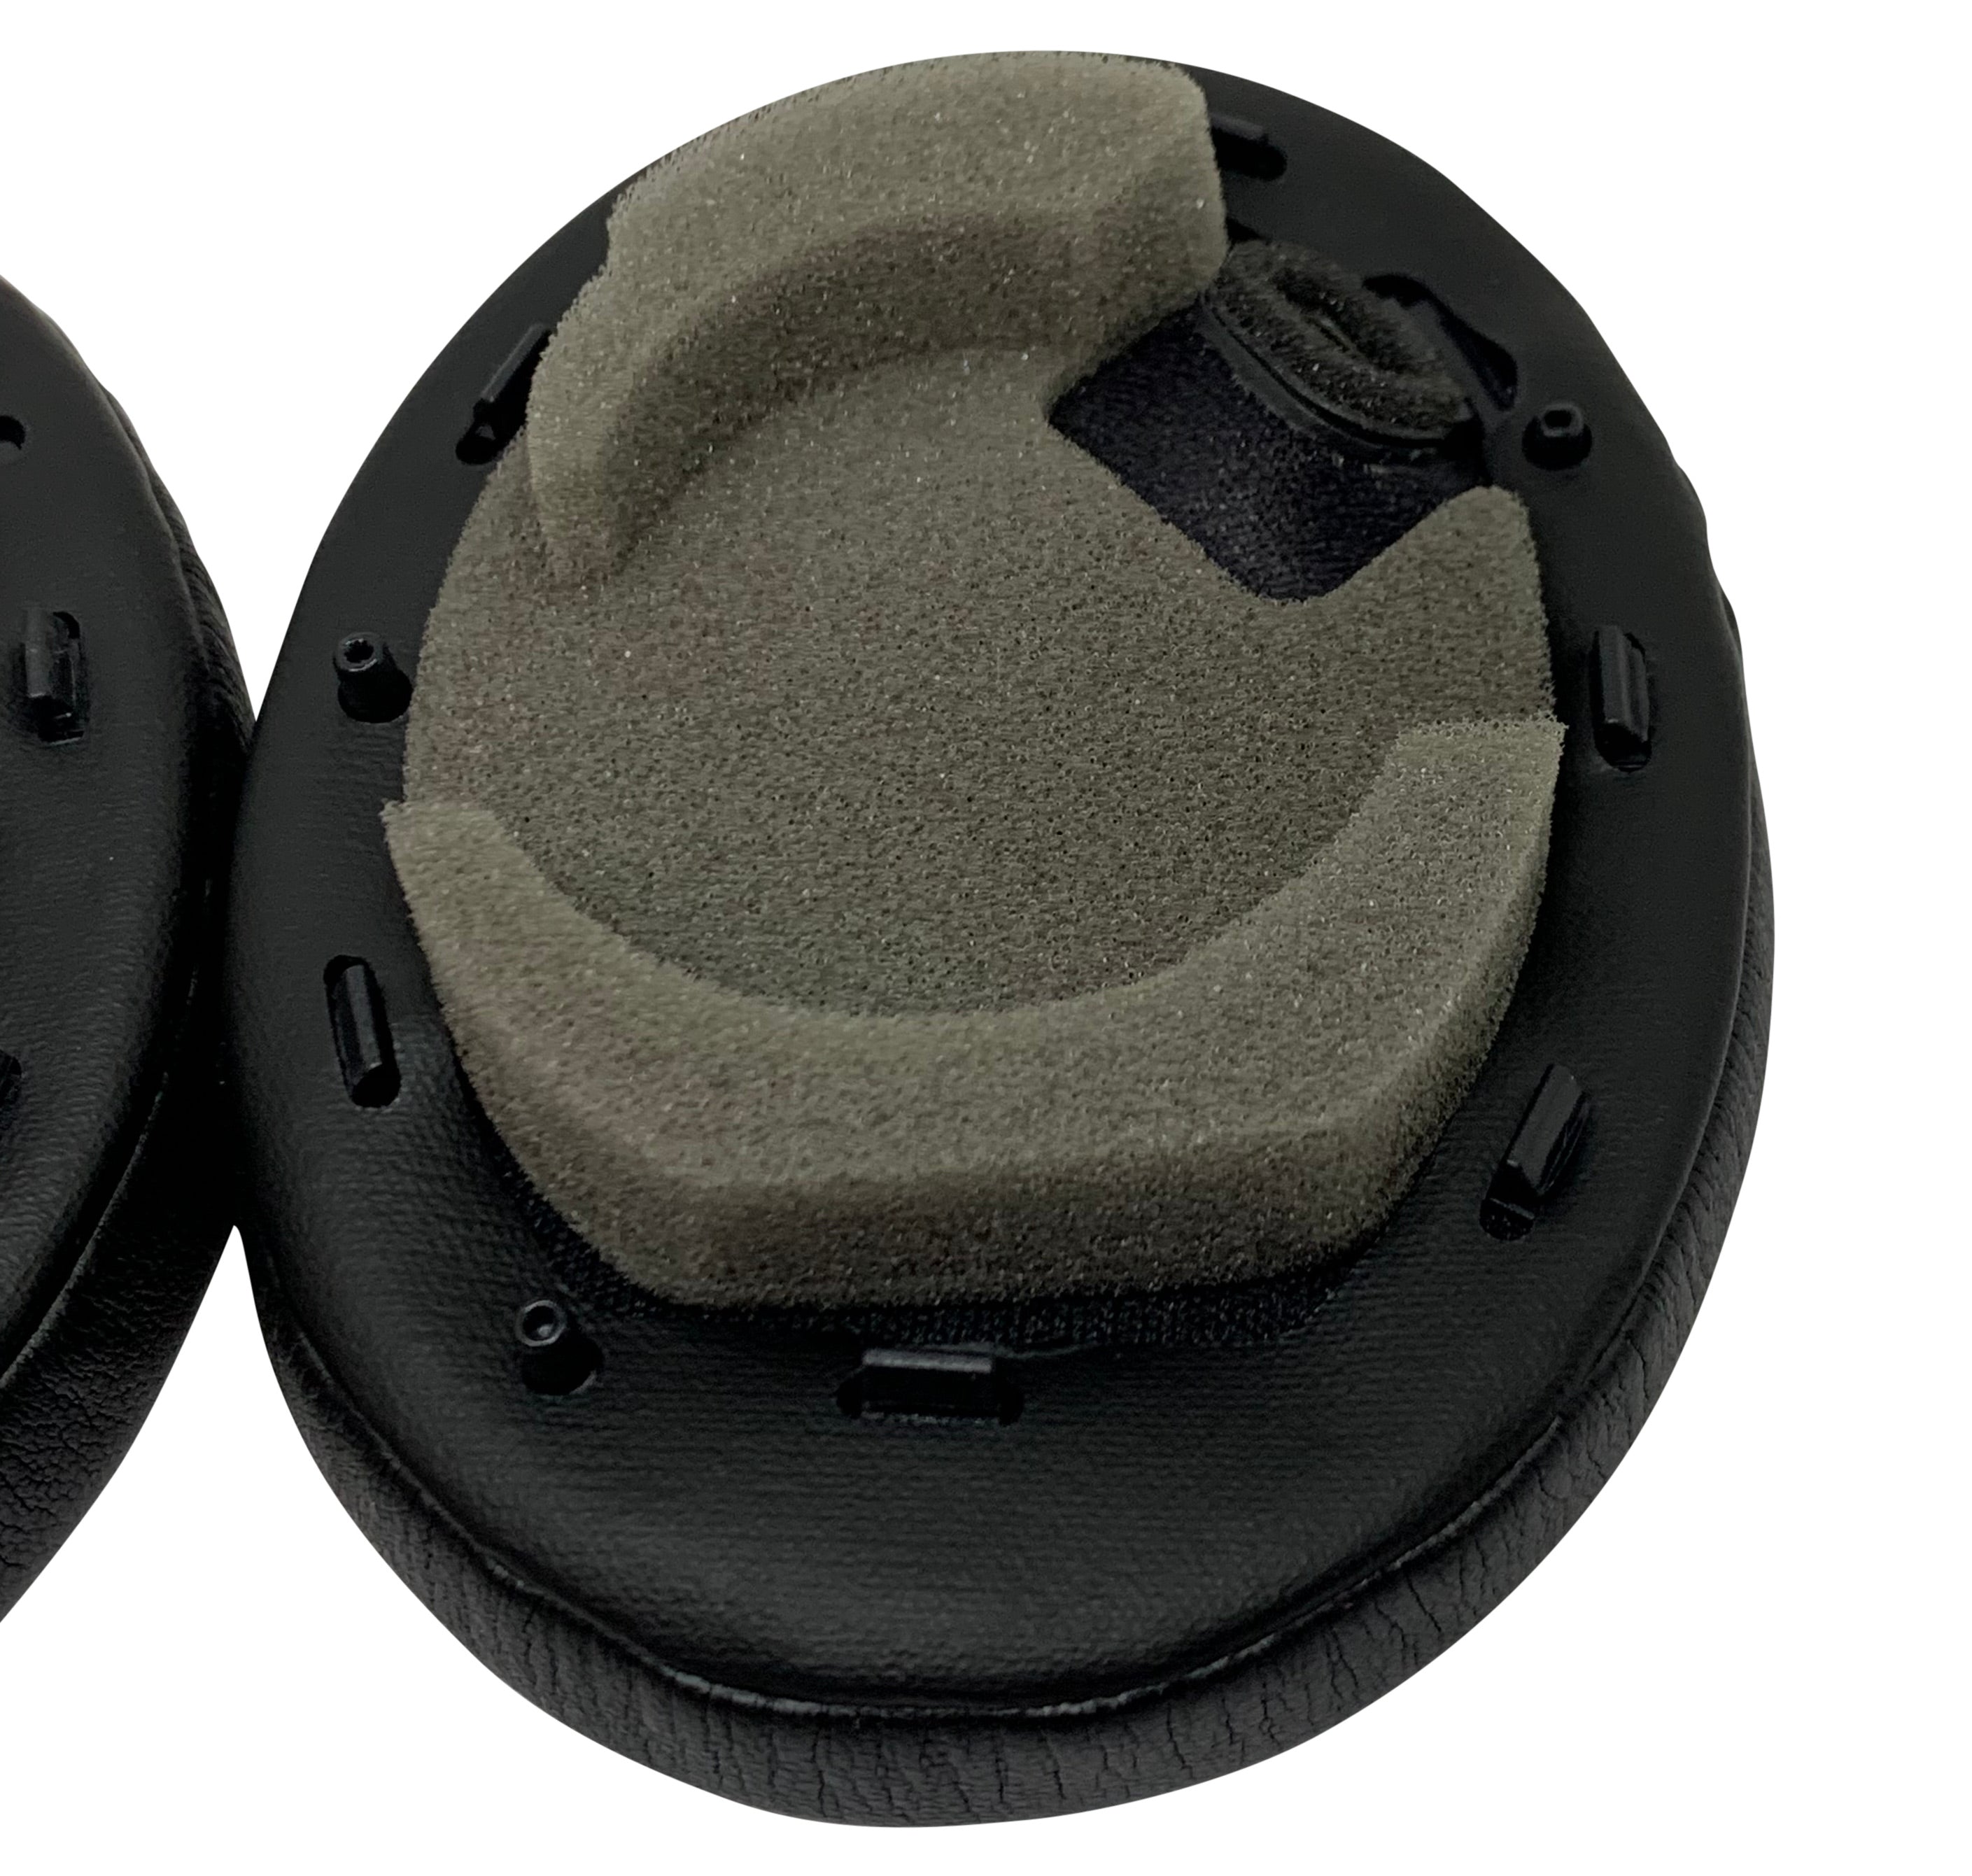 CentralSound Replacement Ear Pad Cushions for Sony WH-1000XM4 Headphones - CentralSound